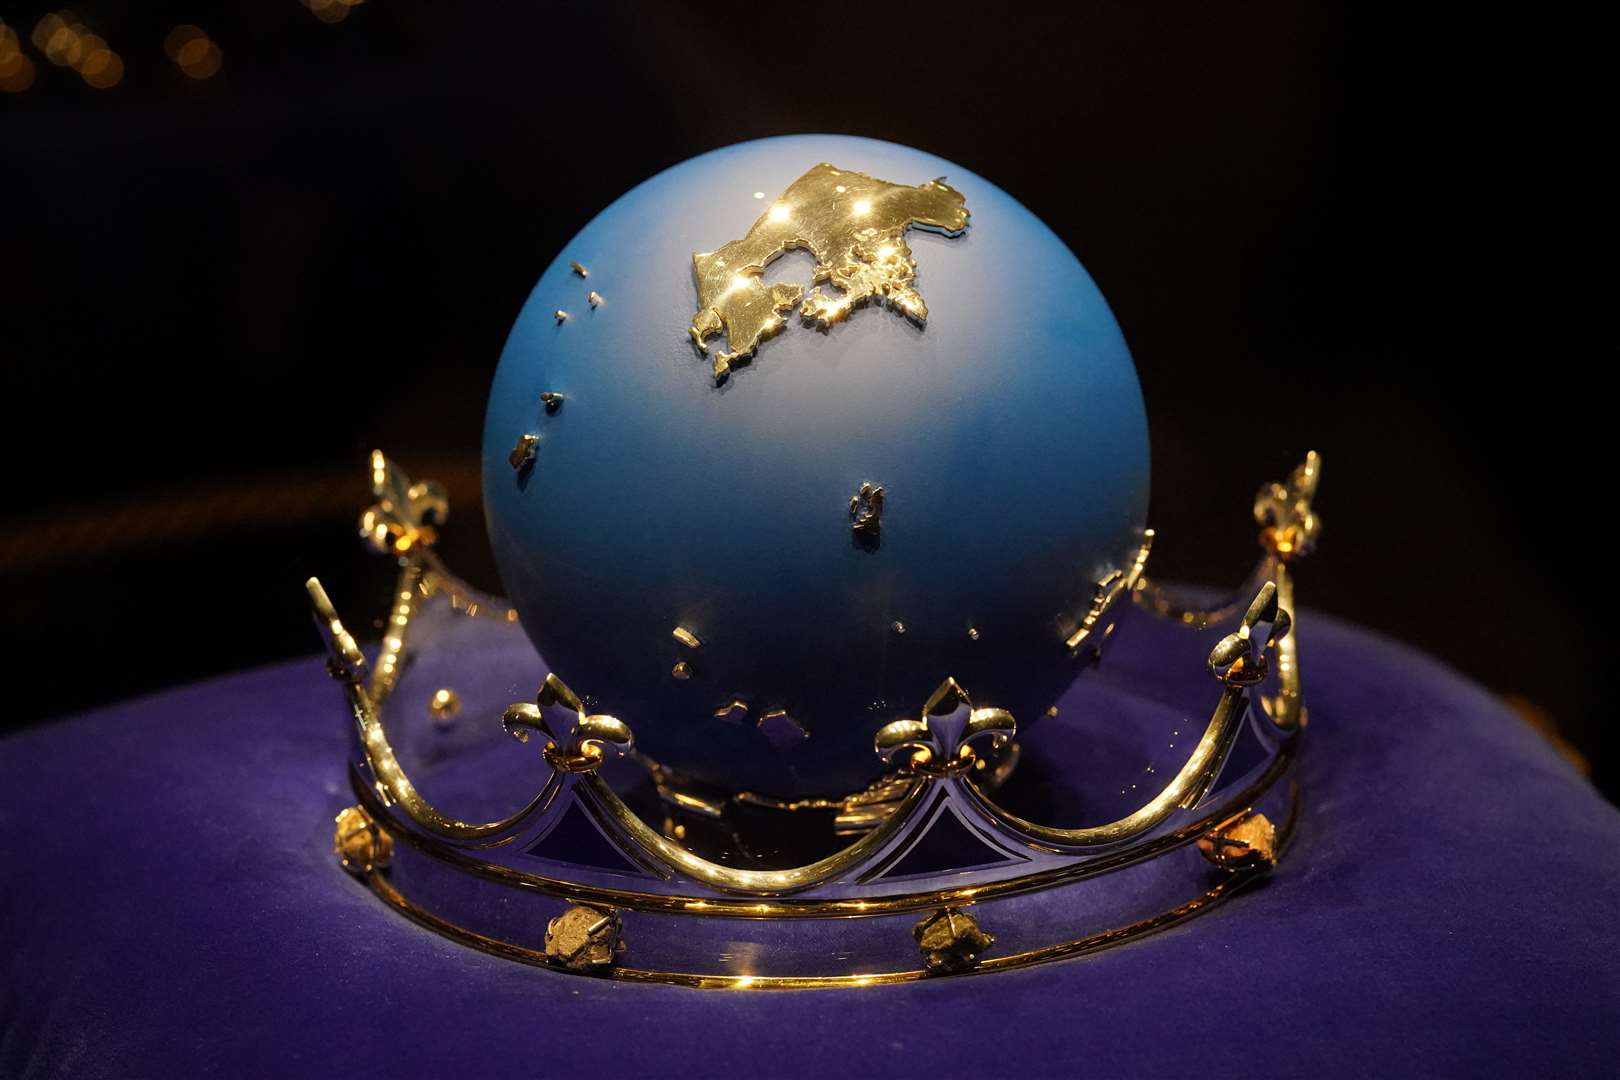 The Queen will touch The Commonwealth of Nations’ Globe (Jonathan Brady/PA)